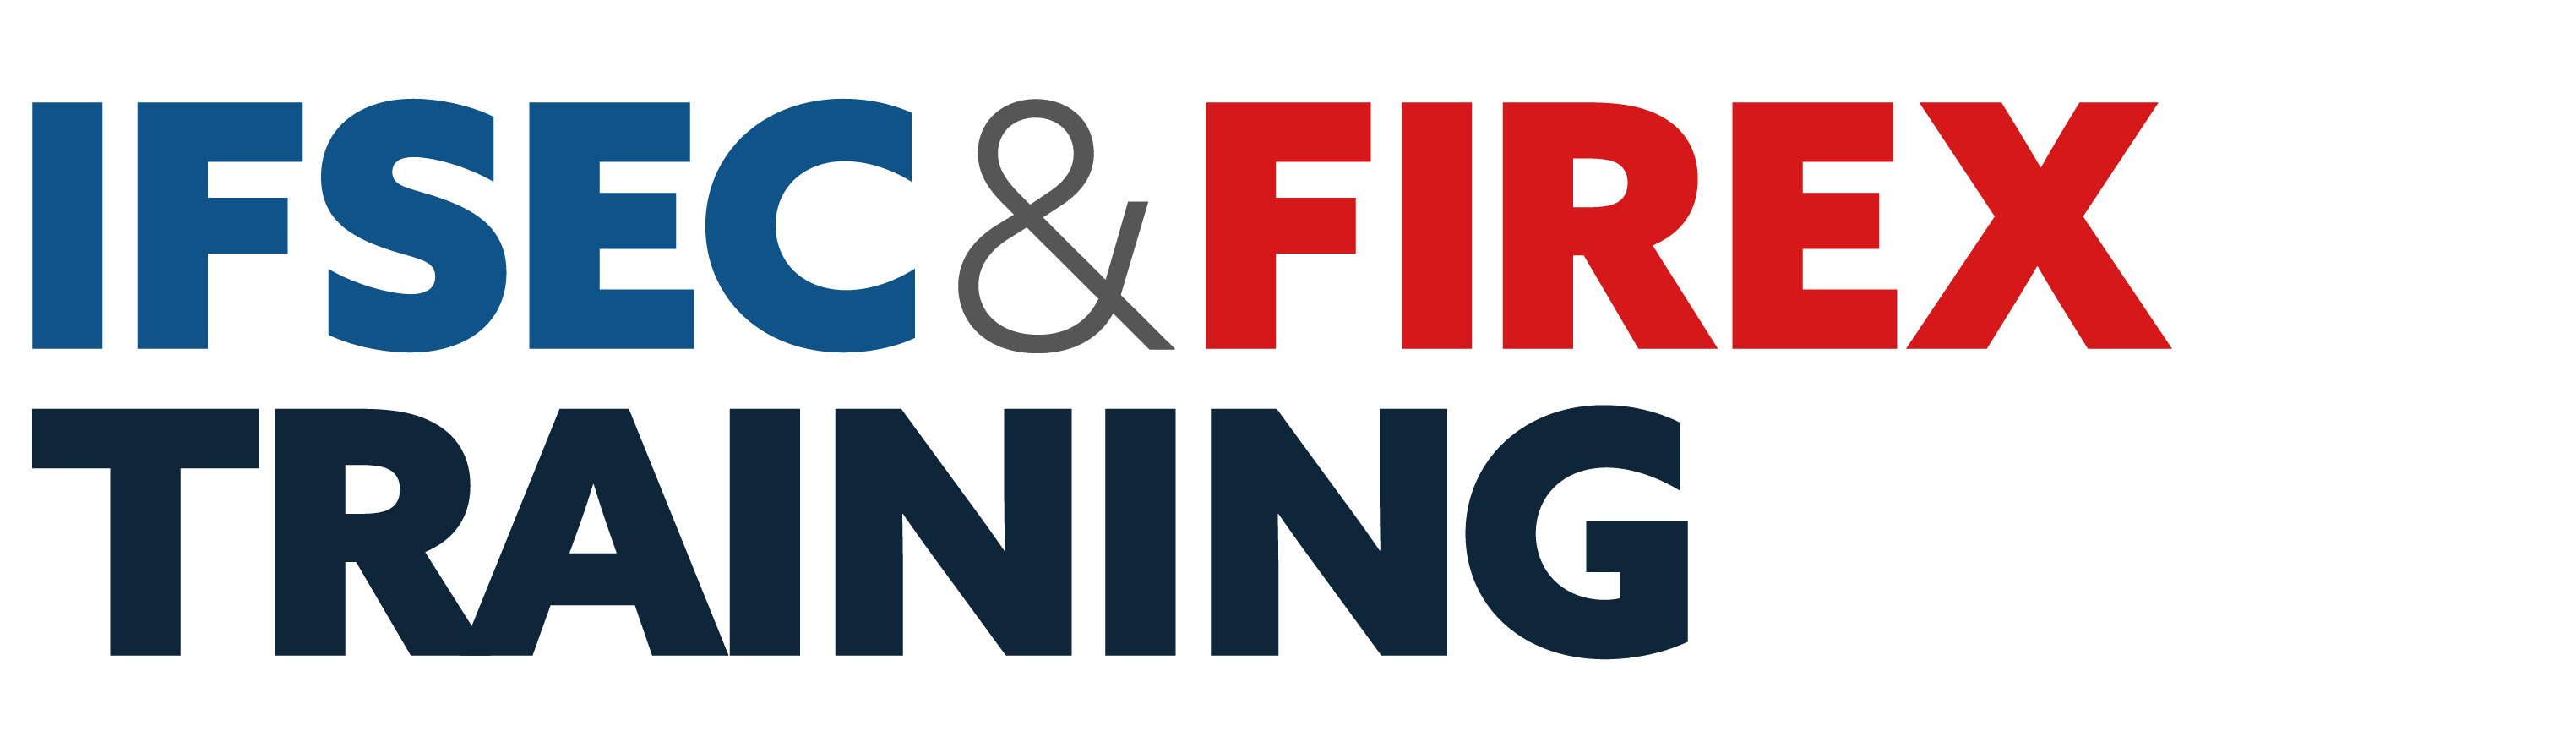 IFSEC & FIREX Training in partnership with Skills for Security